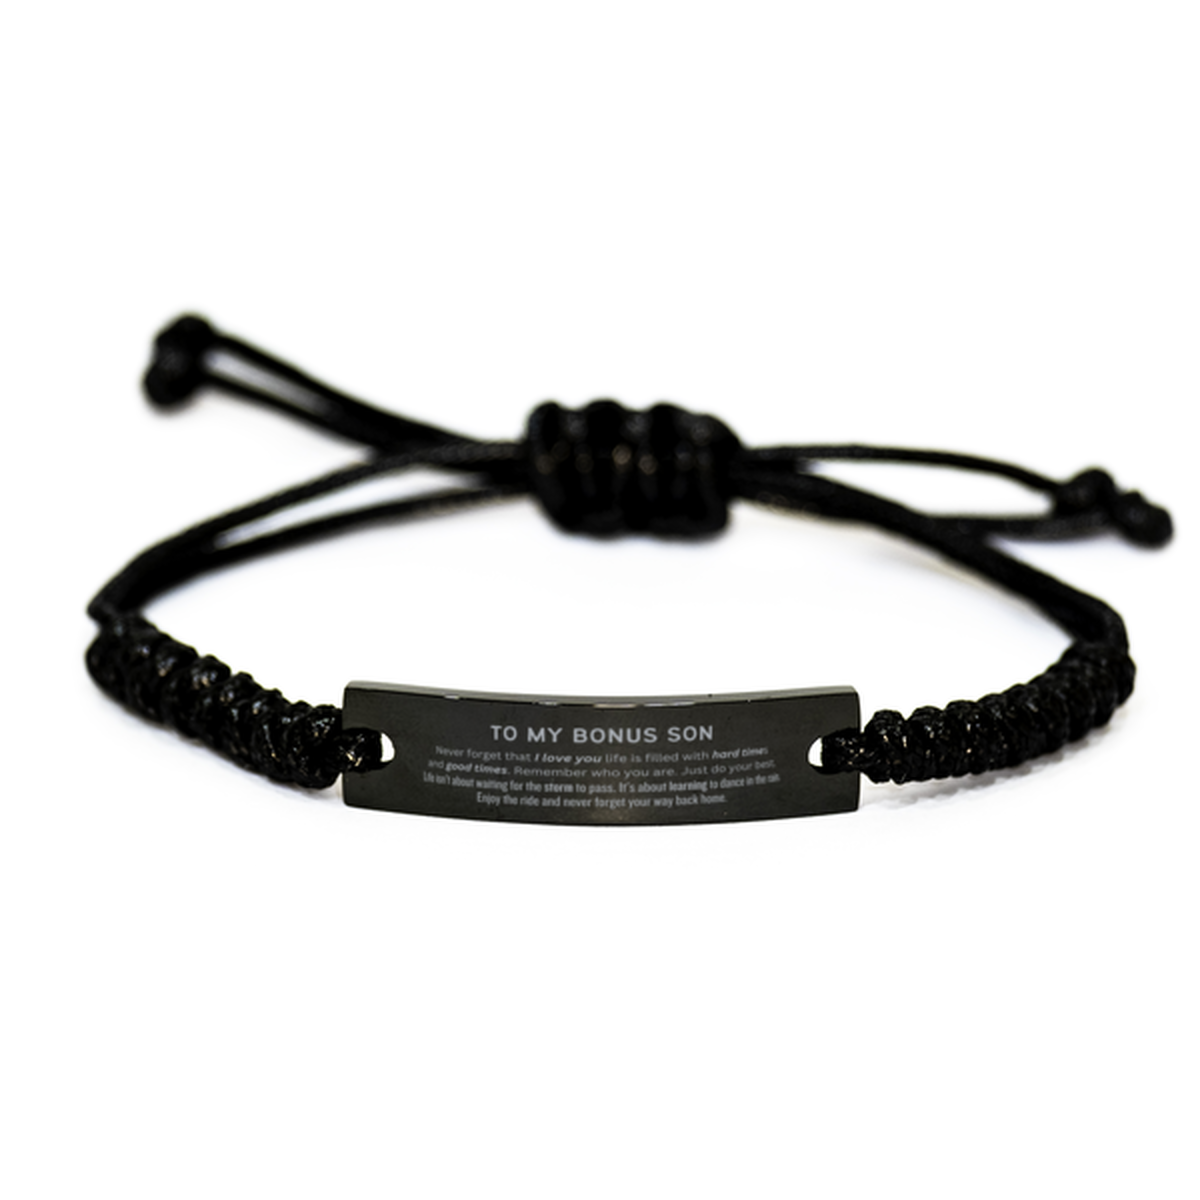 Christmas Bonus Son Black Rope Bracelet Gifts, To My Bonus Son Birthday Thank You Gifts For Bonus Son, Graduation Unique Gifts For Bonus Son To My Bonus Son Never forget that I love you life is filled with hard times and good times. Remember who you are.